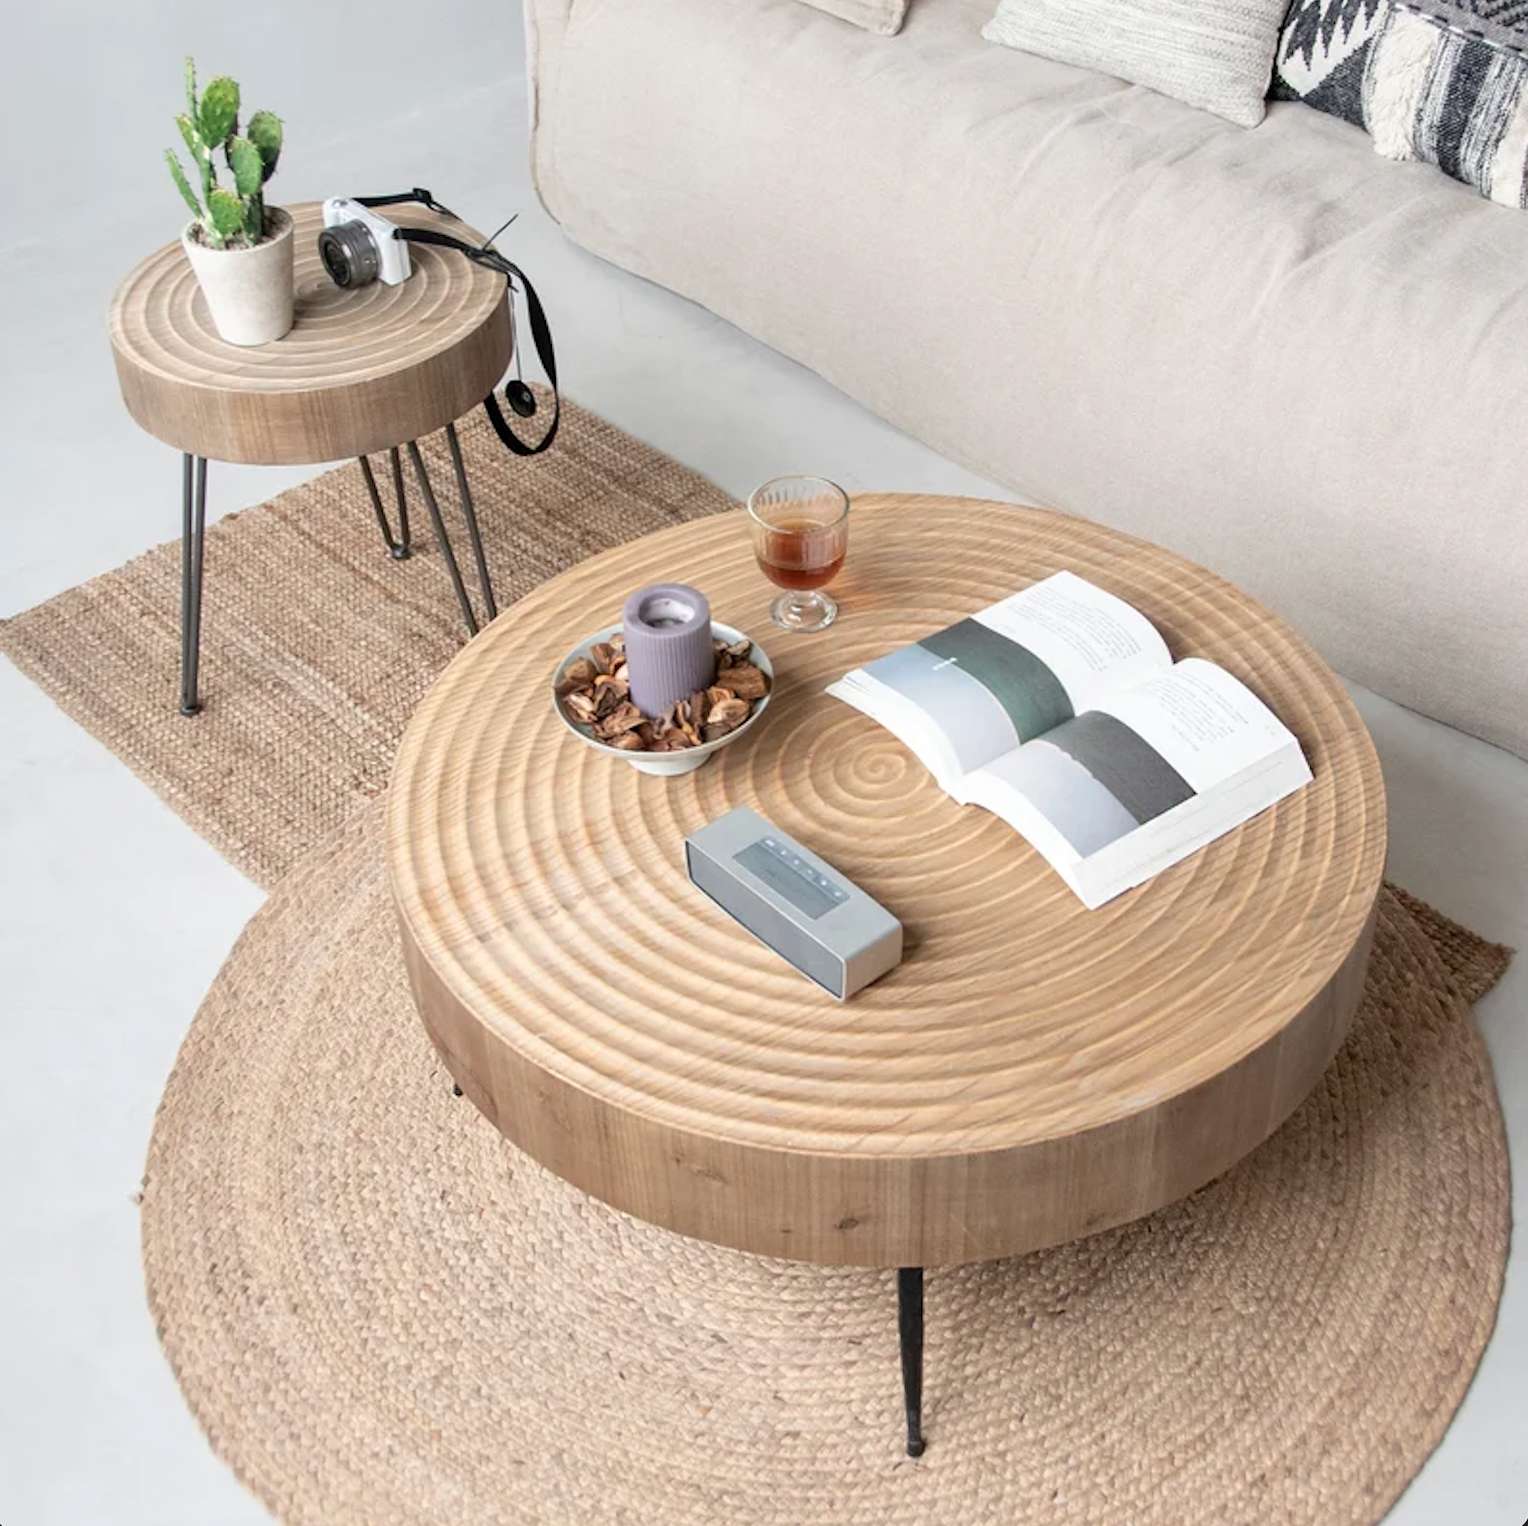 2-Piece Modern Farmhouse Living Room Coffee Table Set, Nesting Table Round with Han